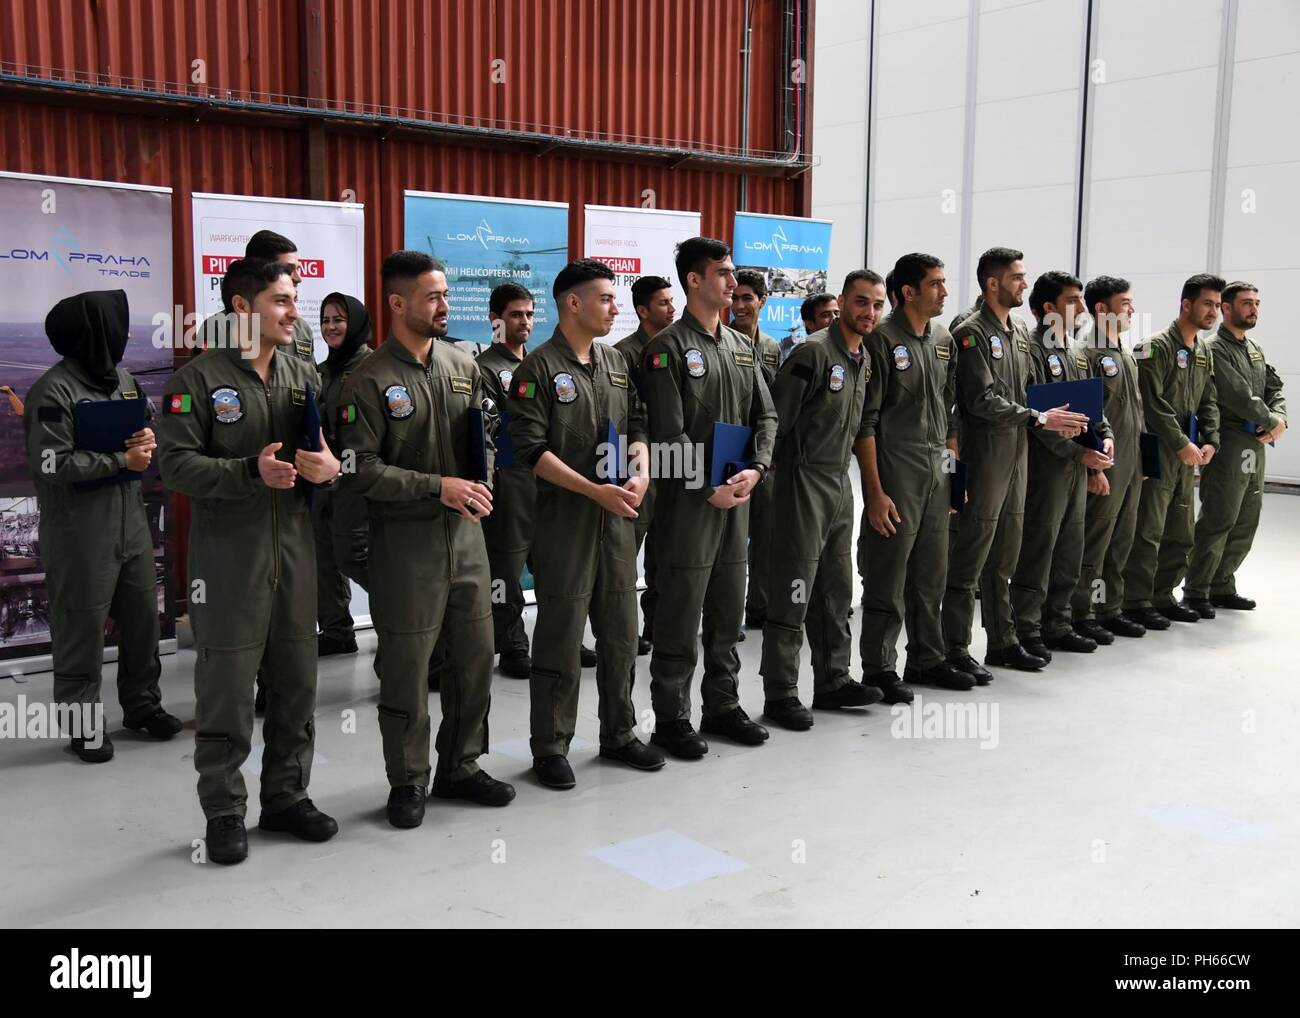 PARDUBICE, Czech Republic (June 27, 2018) – The Afghan Air Force's newest  pilots celebrate by dancing after just having graduated Initial Entry  Fixed-Wing school at Lom Praha Flight Training Center, Czech Republic, June  27, 2018. The 15-month ...